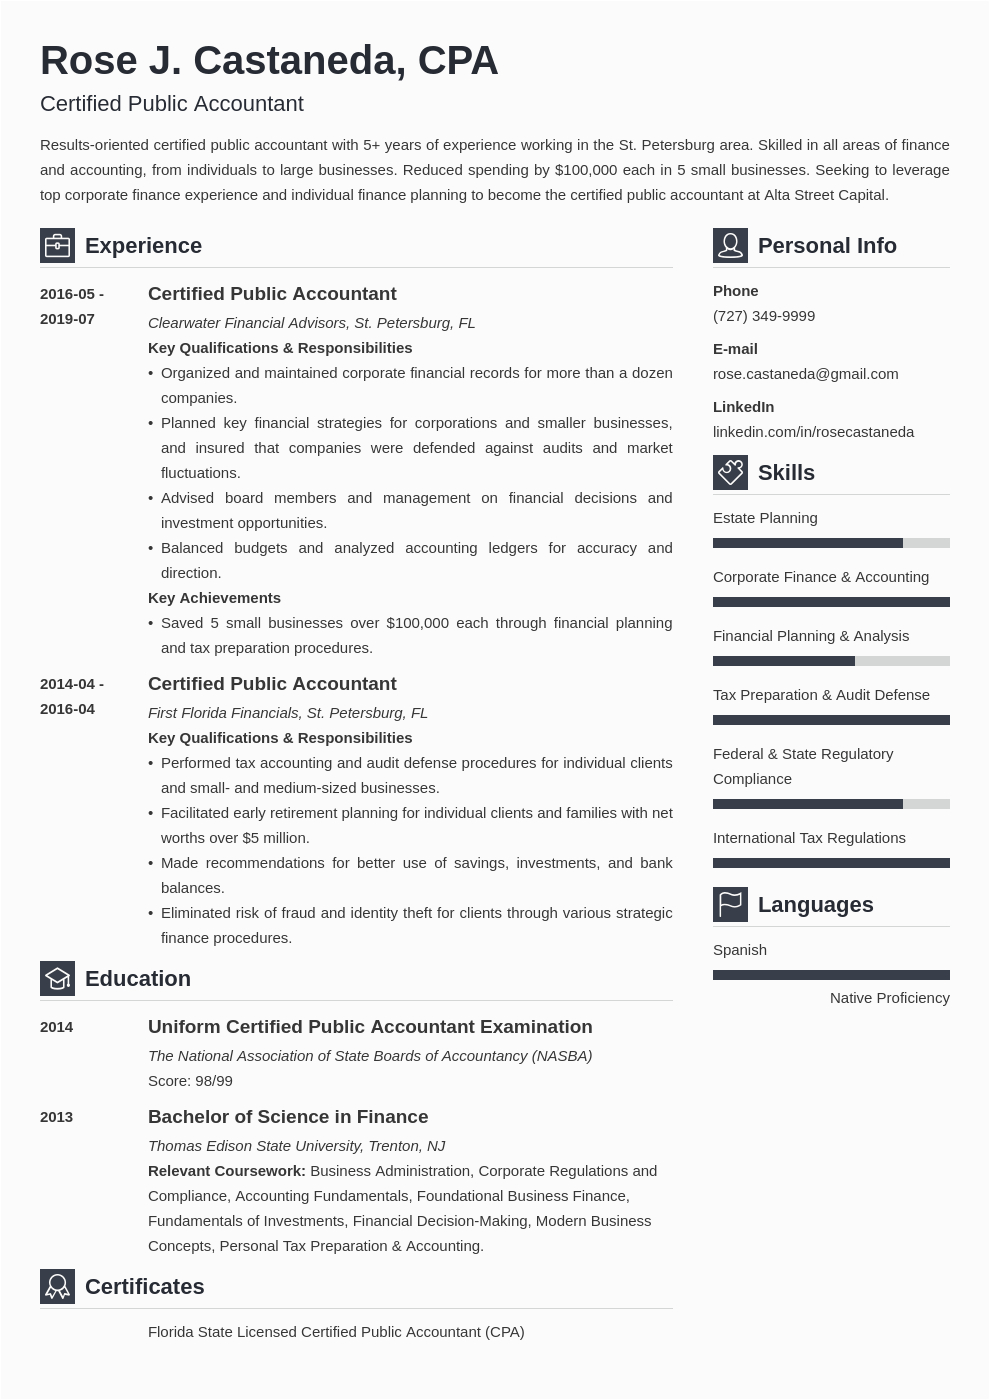 Sample Resume for Cpa Board Passer Certified Public Accountant Cpa Resume Sample & Guide